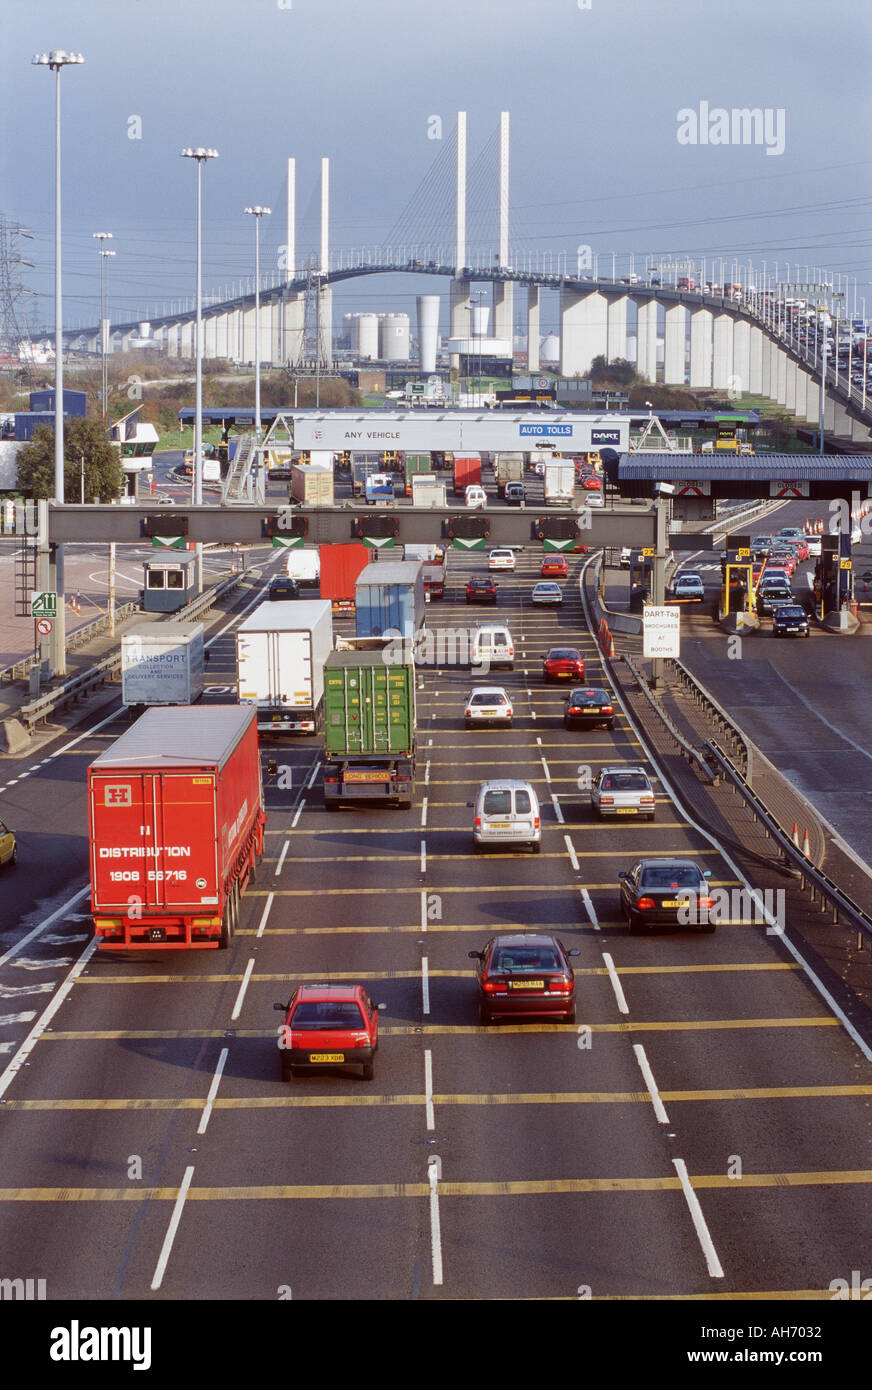 Queen Elizabeth bridge London over Thames river showing cars and lorries traveling through toll bridge area Stock Photo